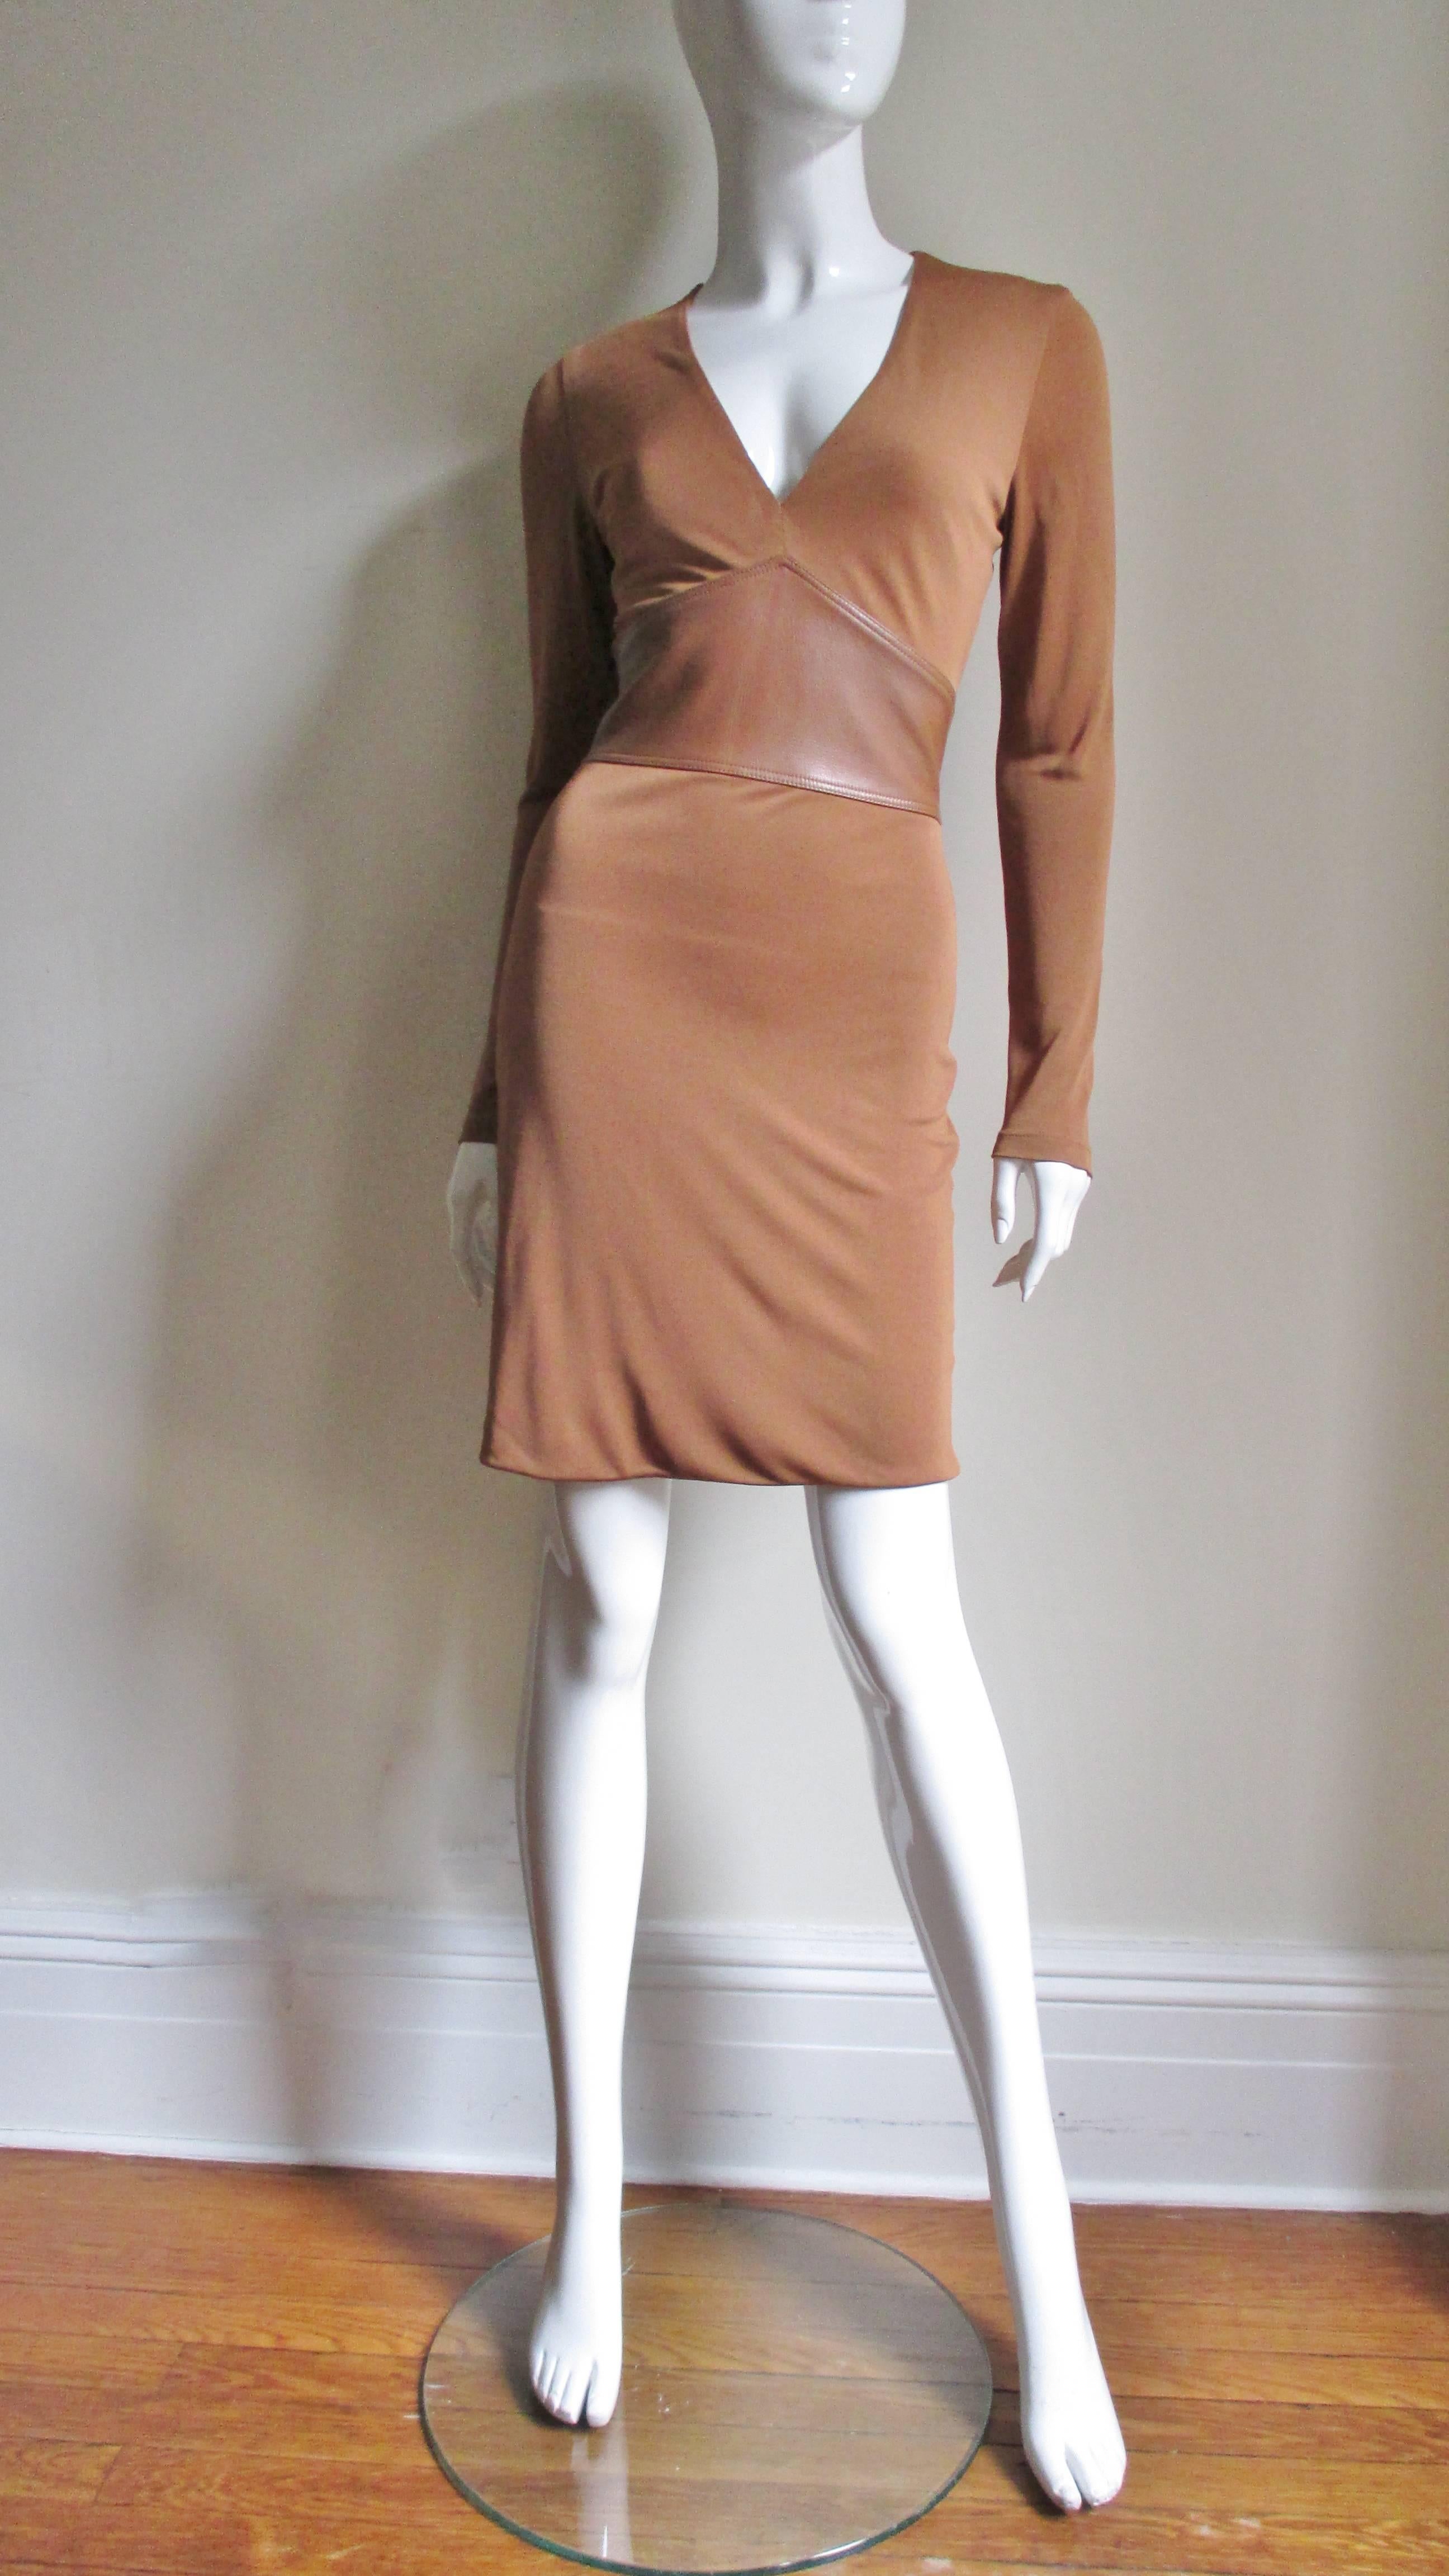 Gianni Versace Silk Jersey Dress with Leather Waist A/W 2001 In Good Condition For Sale In Water Mill, NY